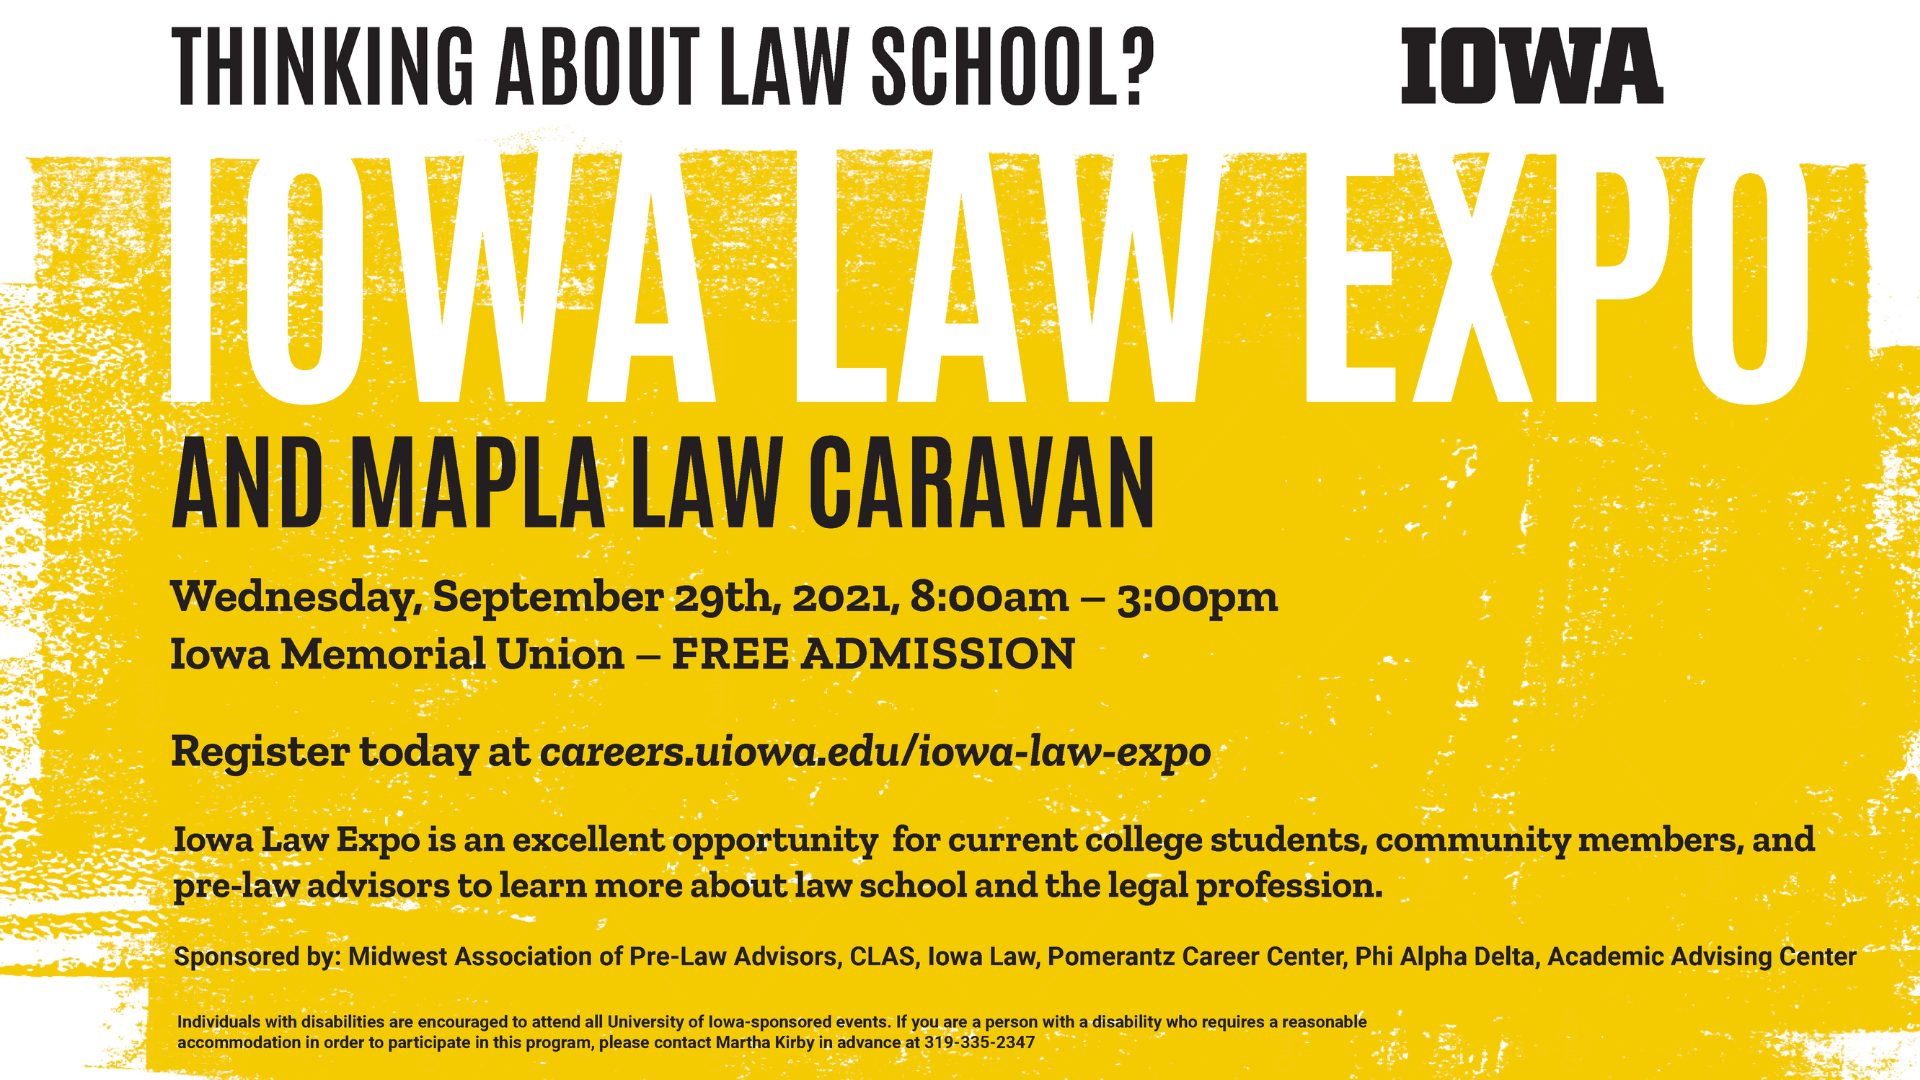 Iowa Law Expo and MAPLA Law Caravan September 29